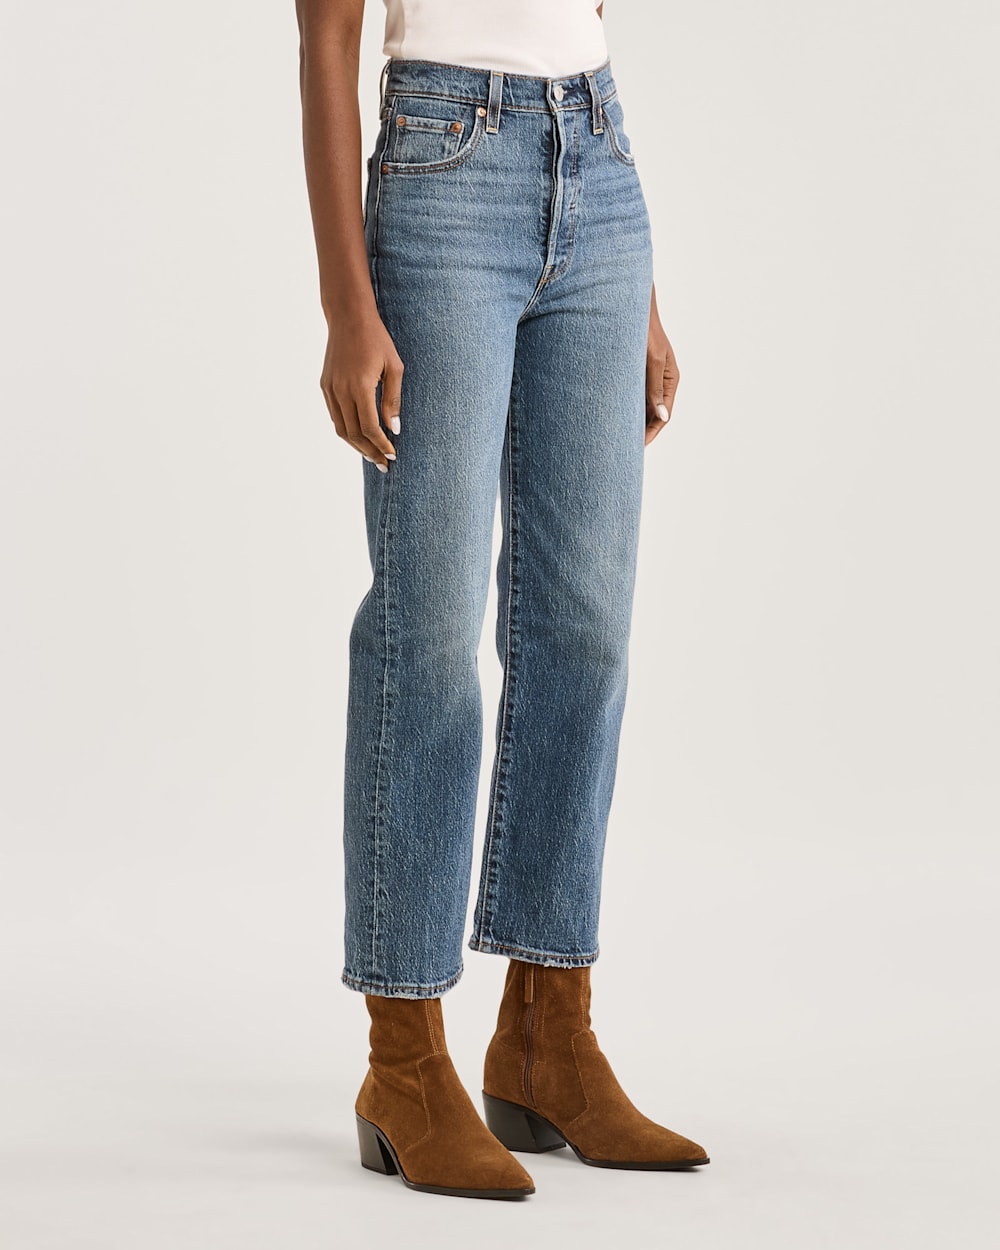 ALTERNATE VIEW OF WOMEN'S LEVI'S RIBCAGE STRAIGHT ANKLE JEANS IN VALLEY VIEW image number 2